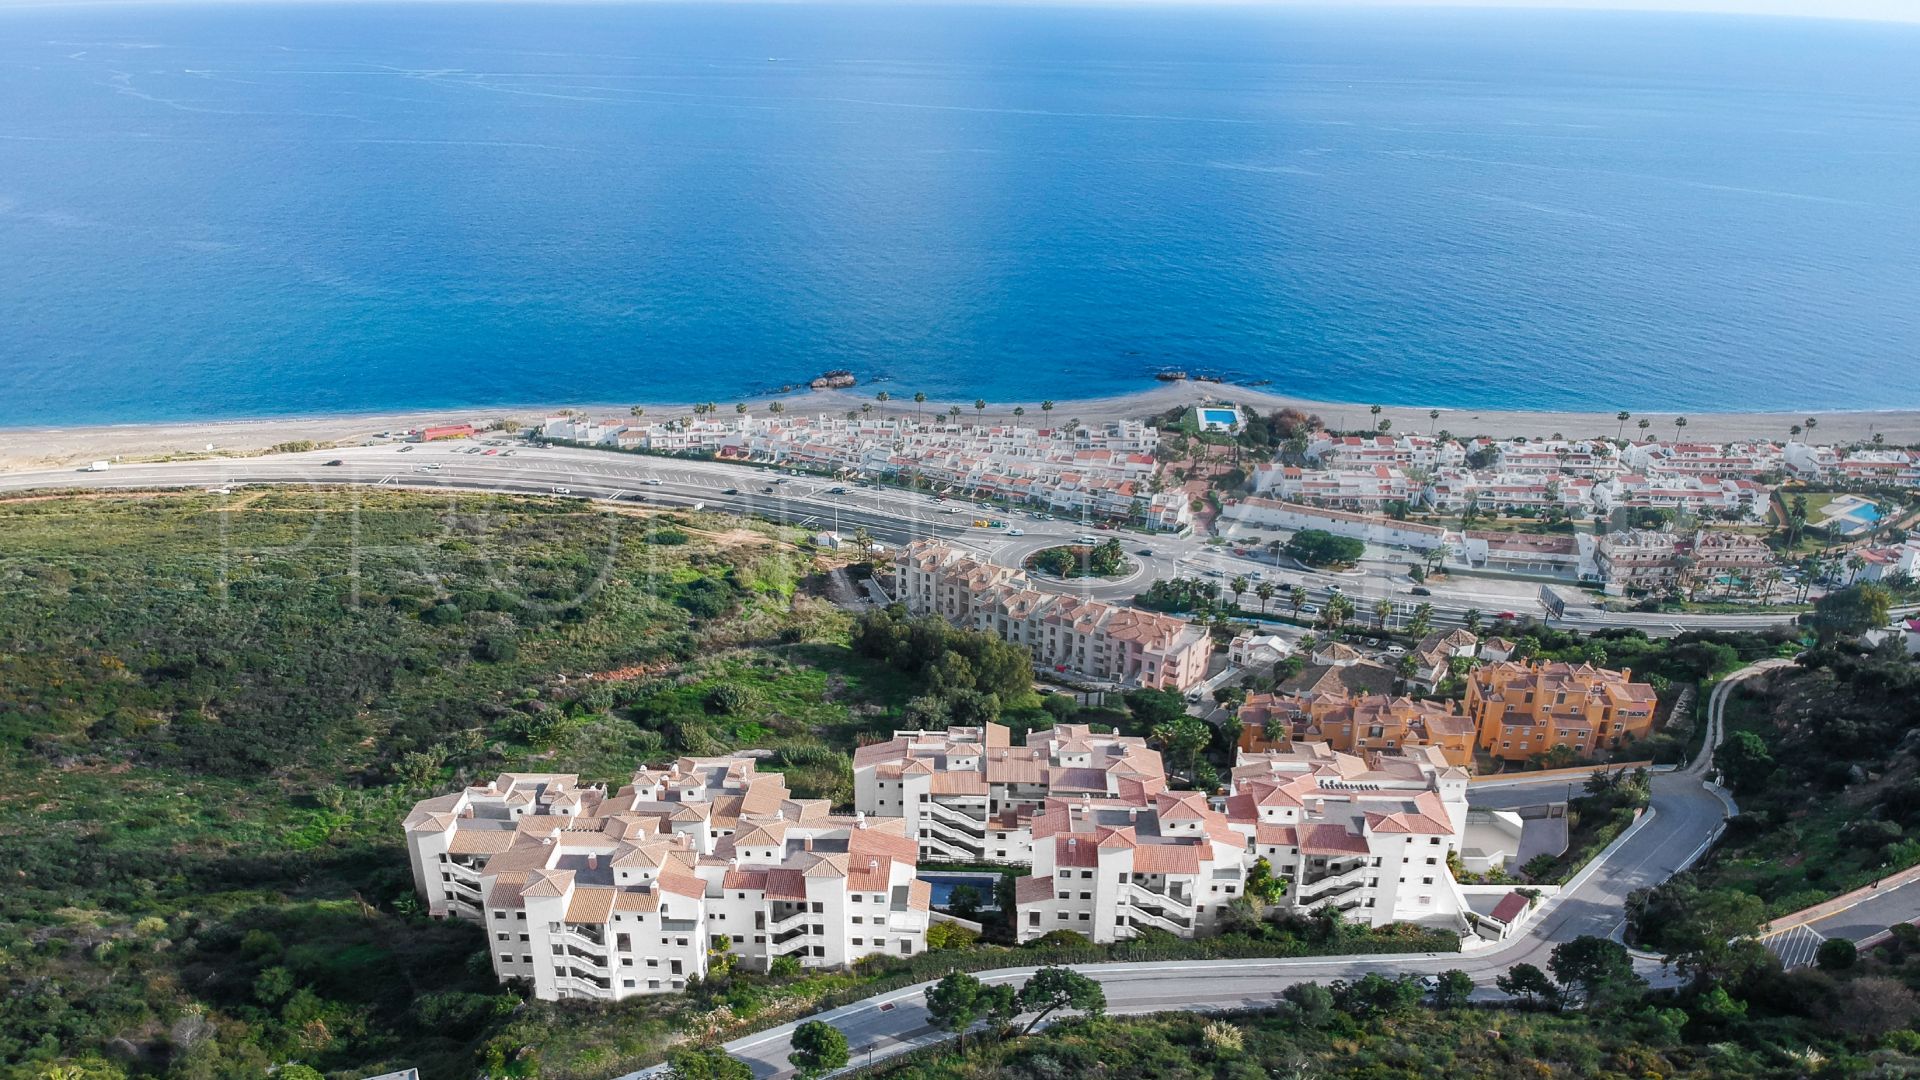 For sale La Paloma apartment with 2 bedrooms